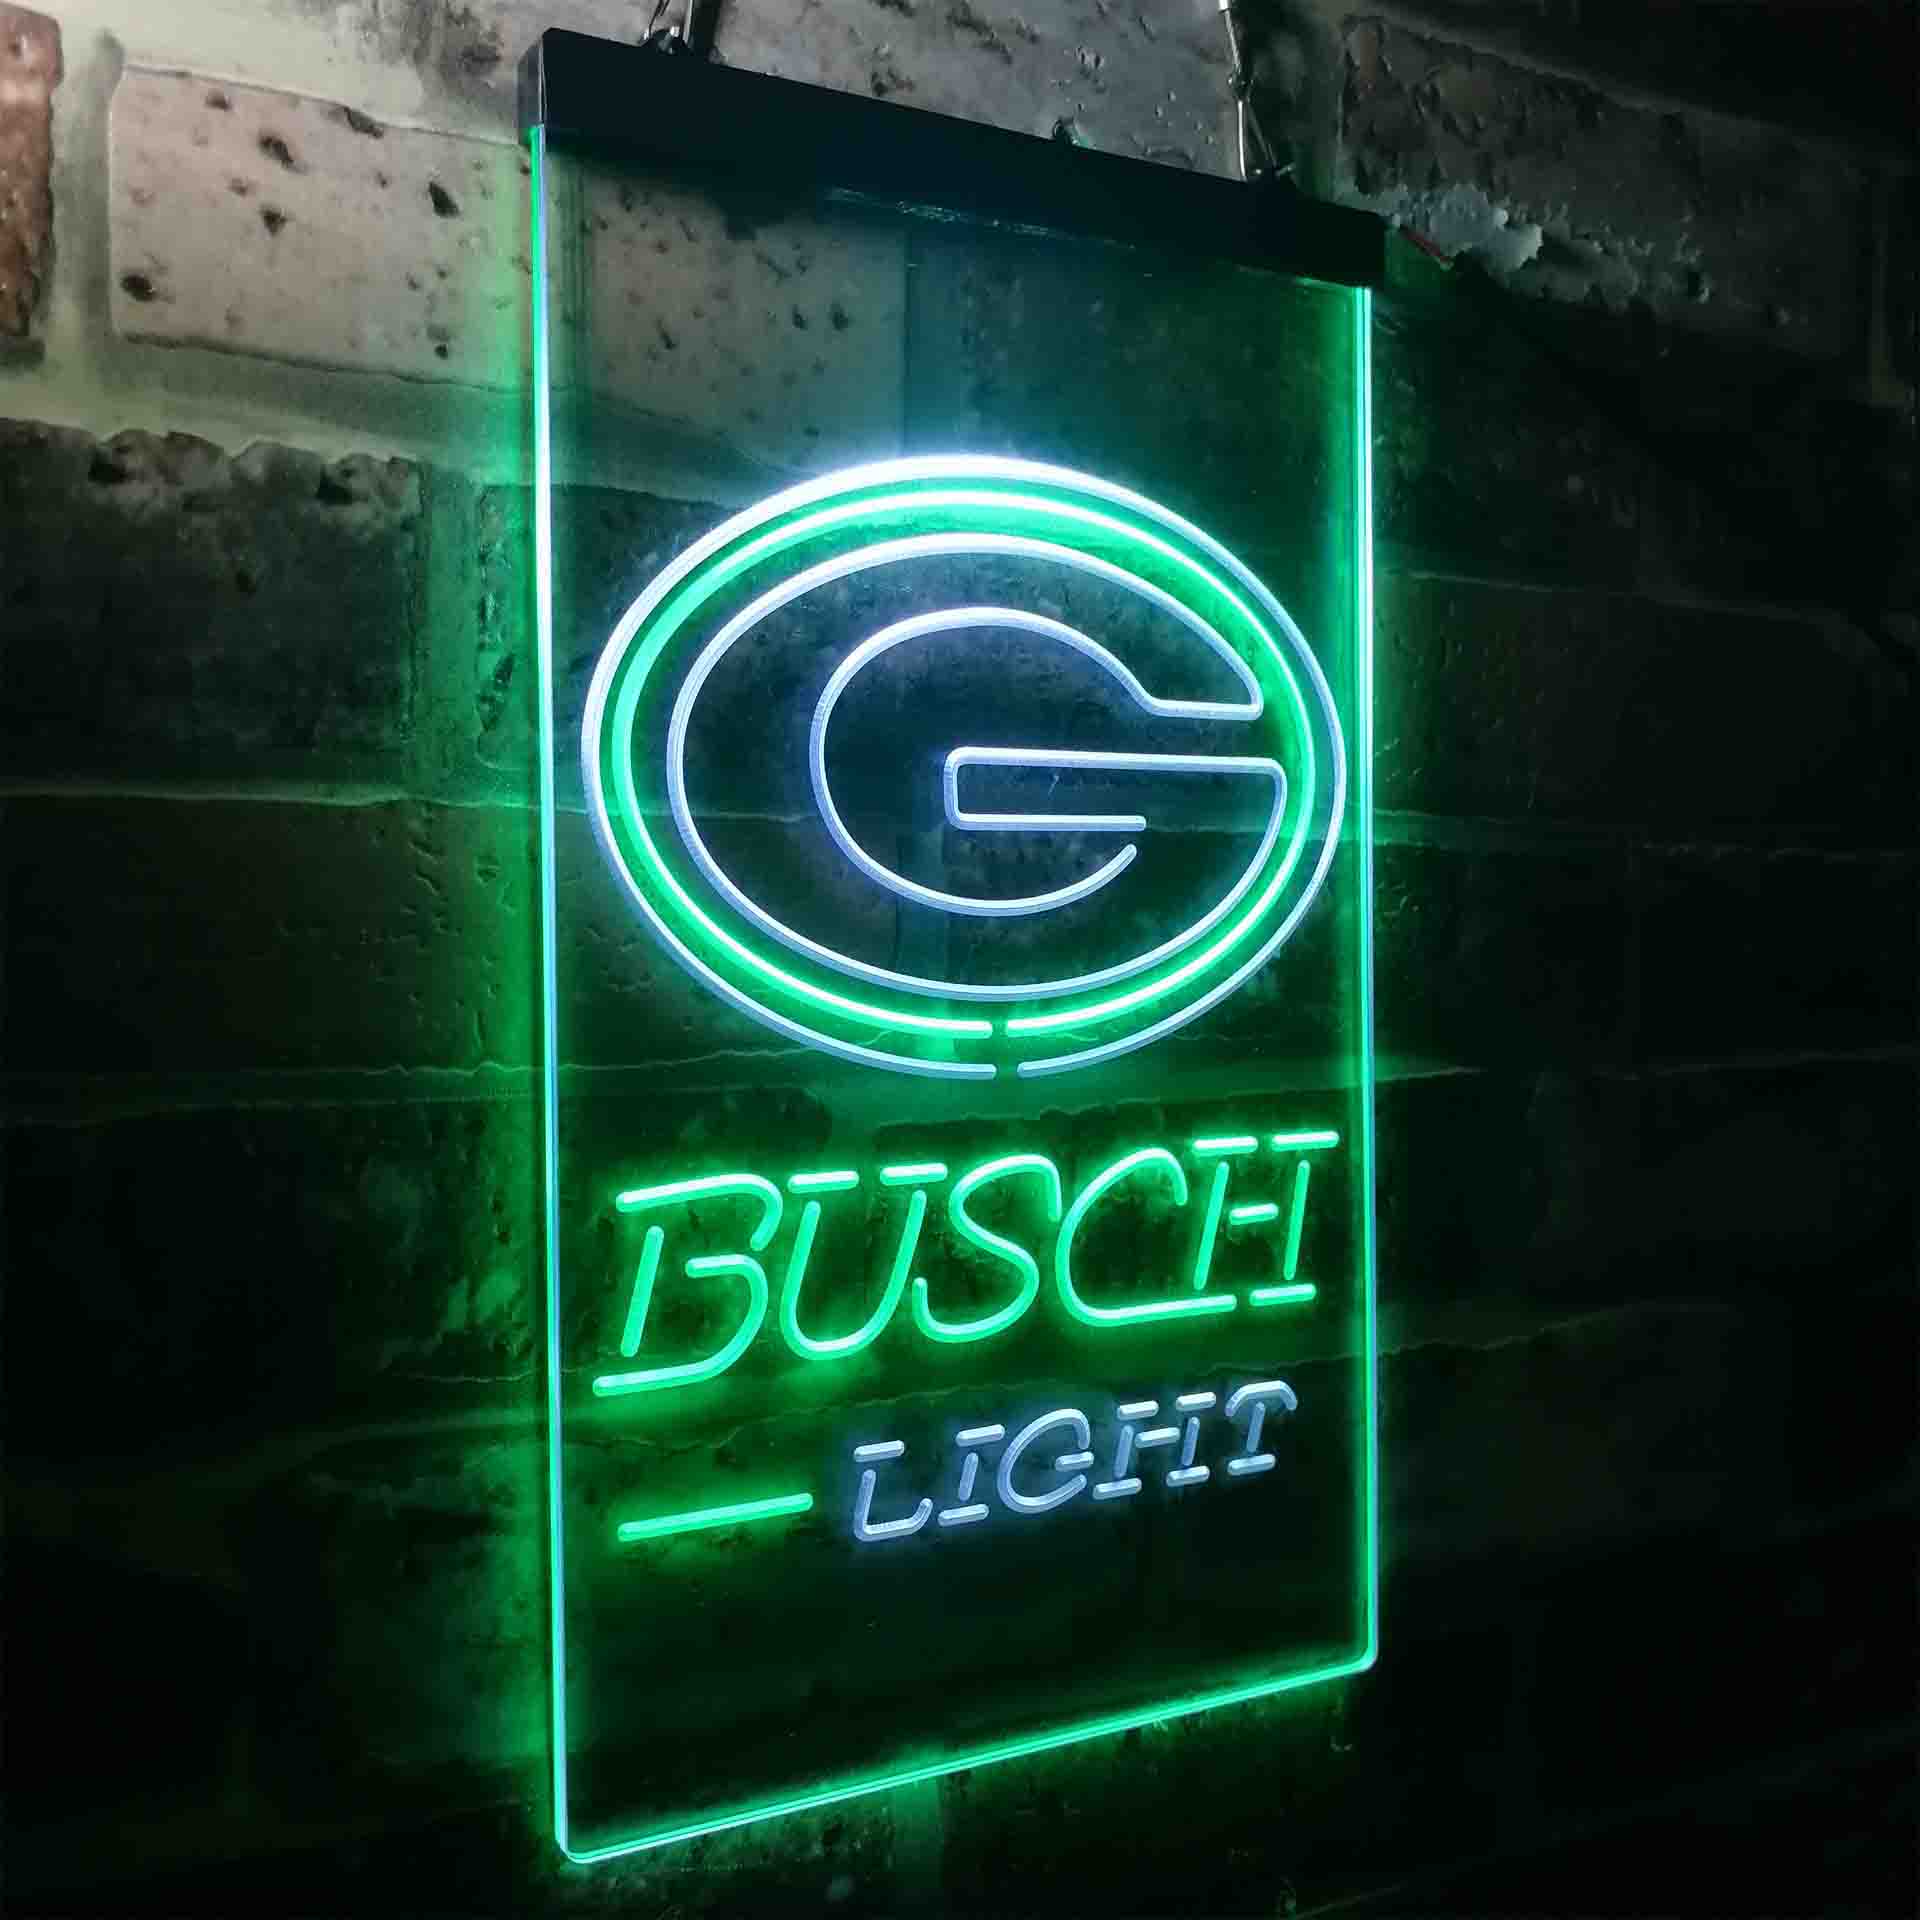 Busch Light Green Bay Packers Neon-Like LED Sign